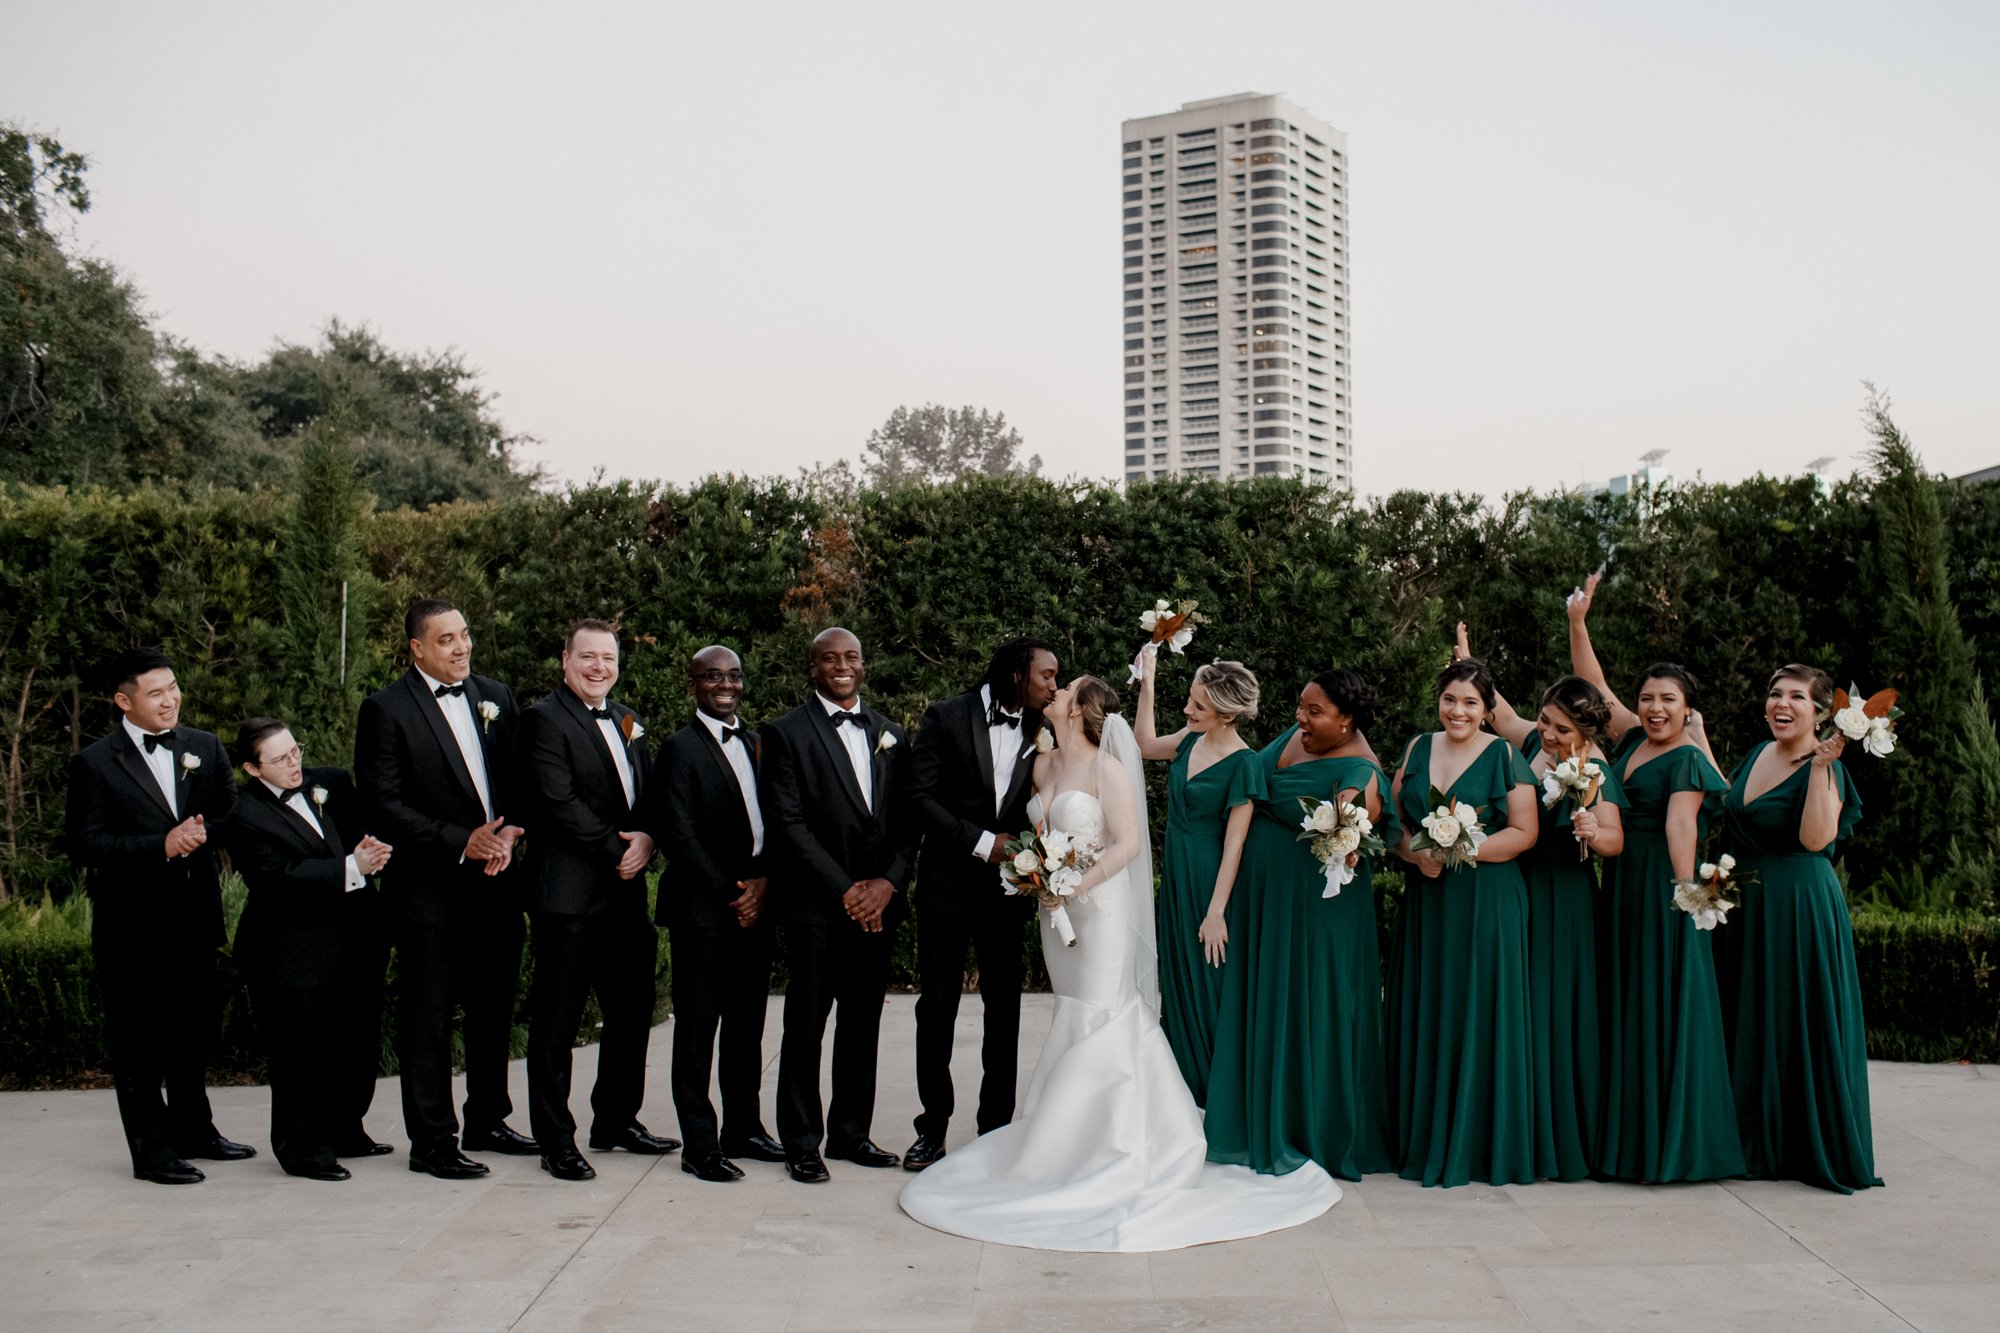 Bride and groom with bridal party. New Orleans Style Wedding at McGovern Centennial Gardens